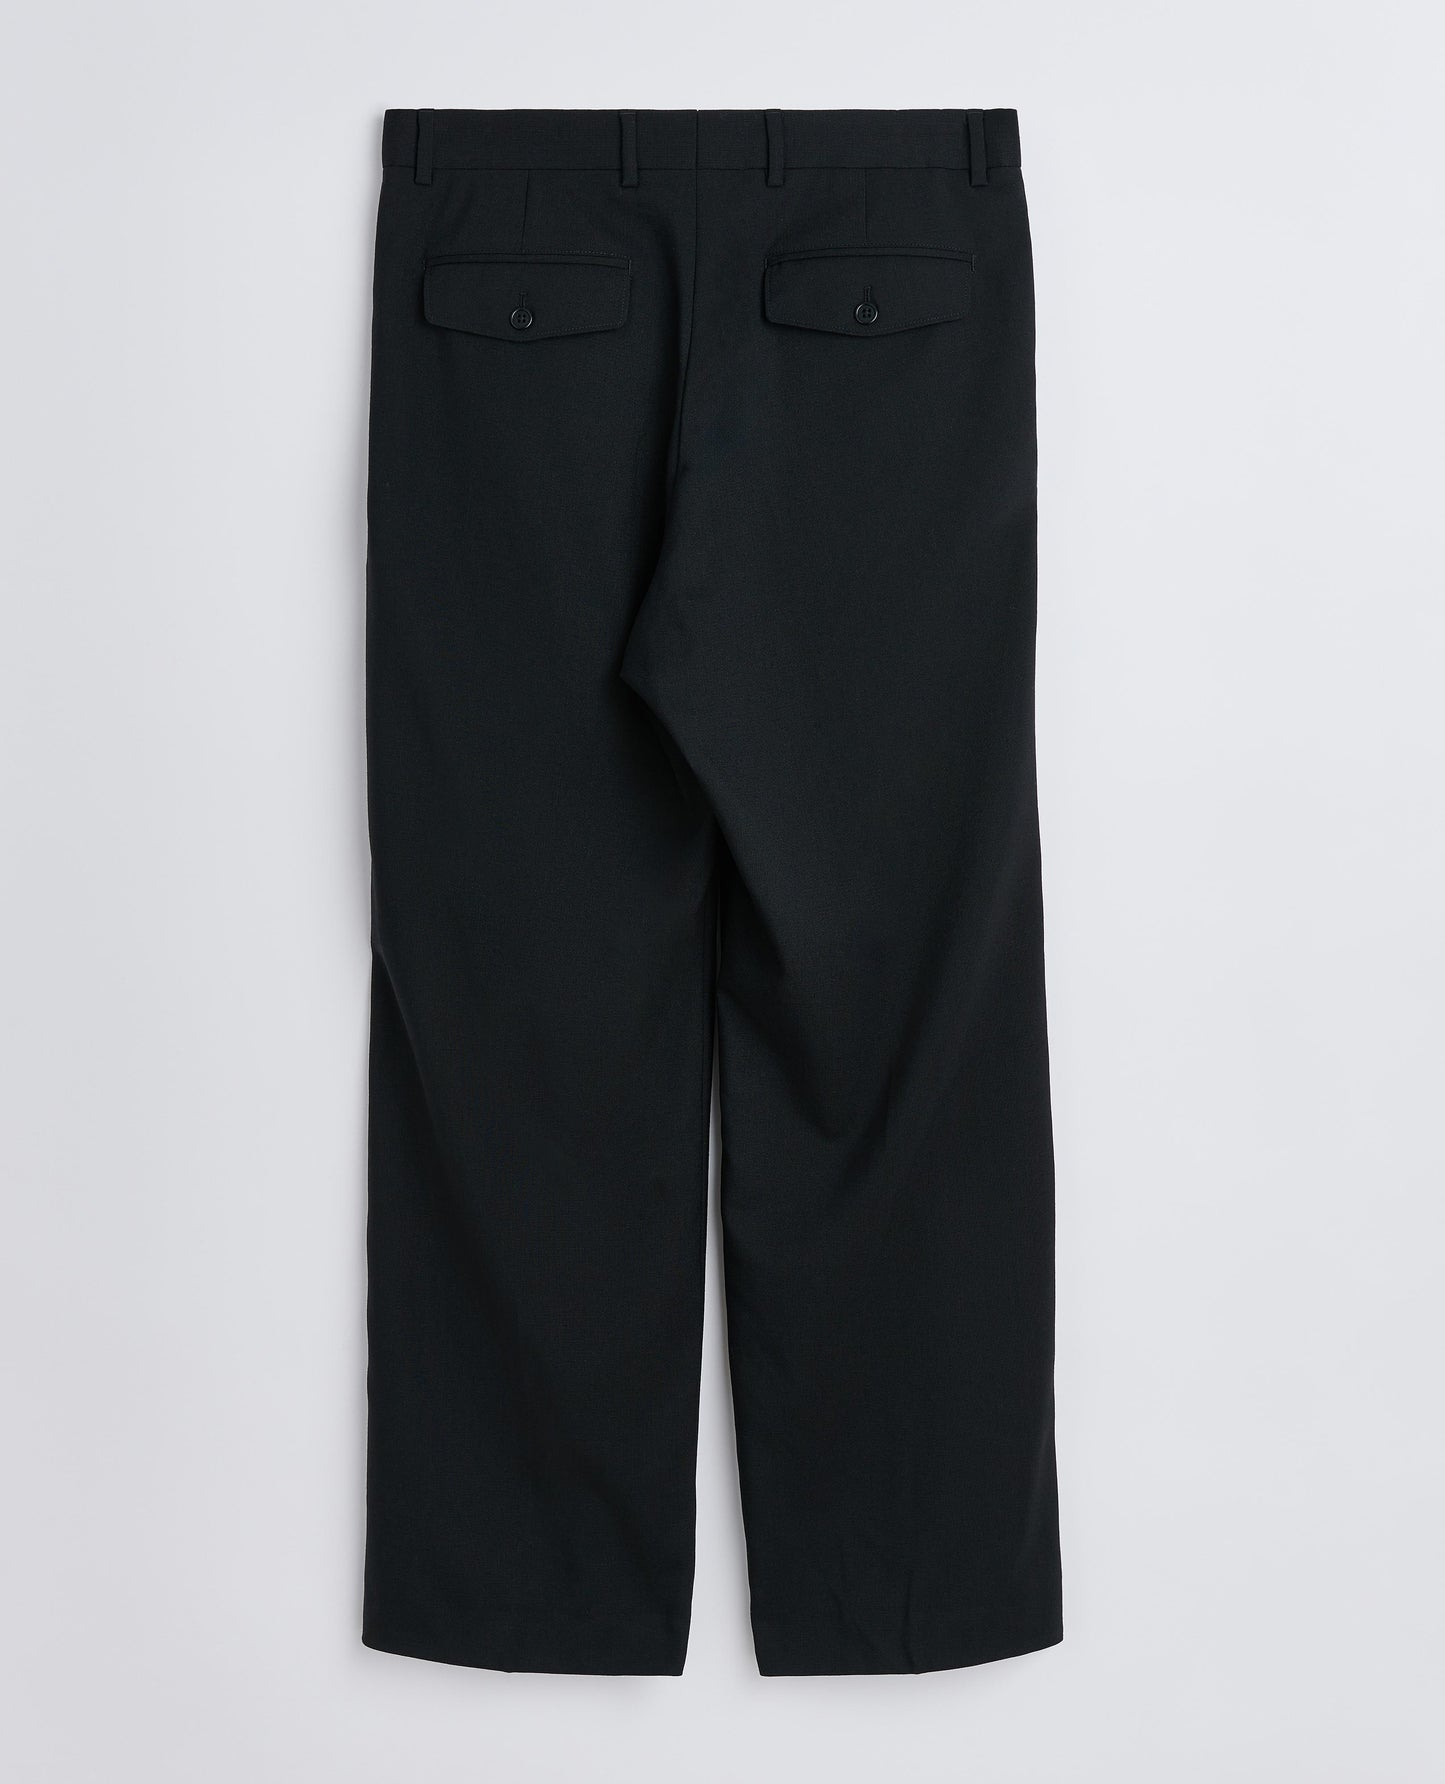 WIDE PLEATED TROUSER . BLACK